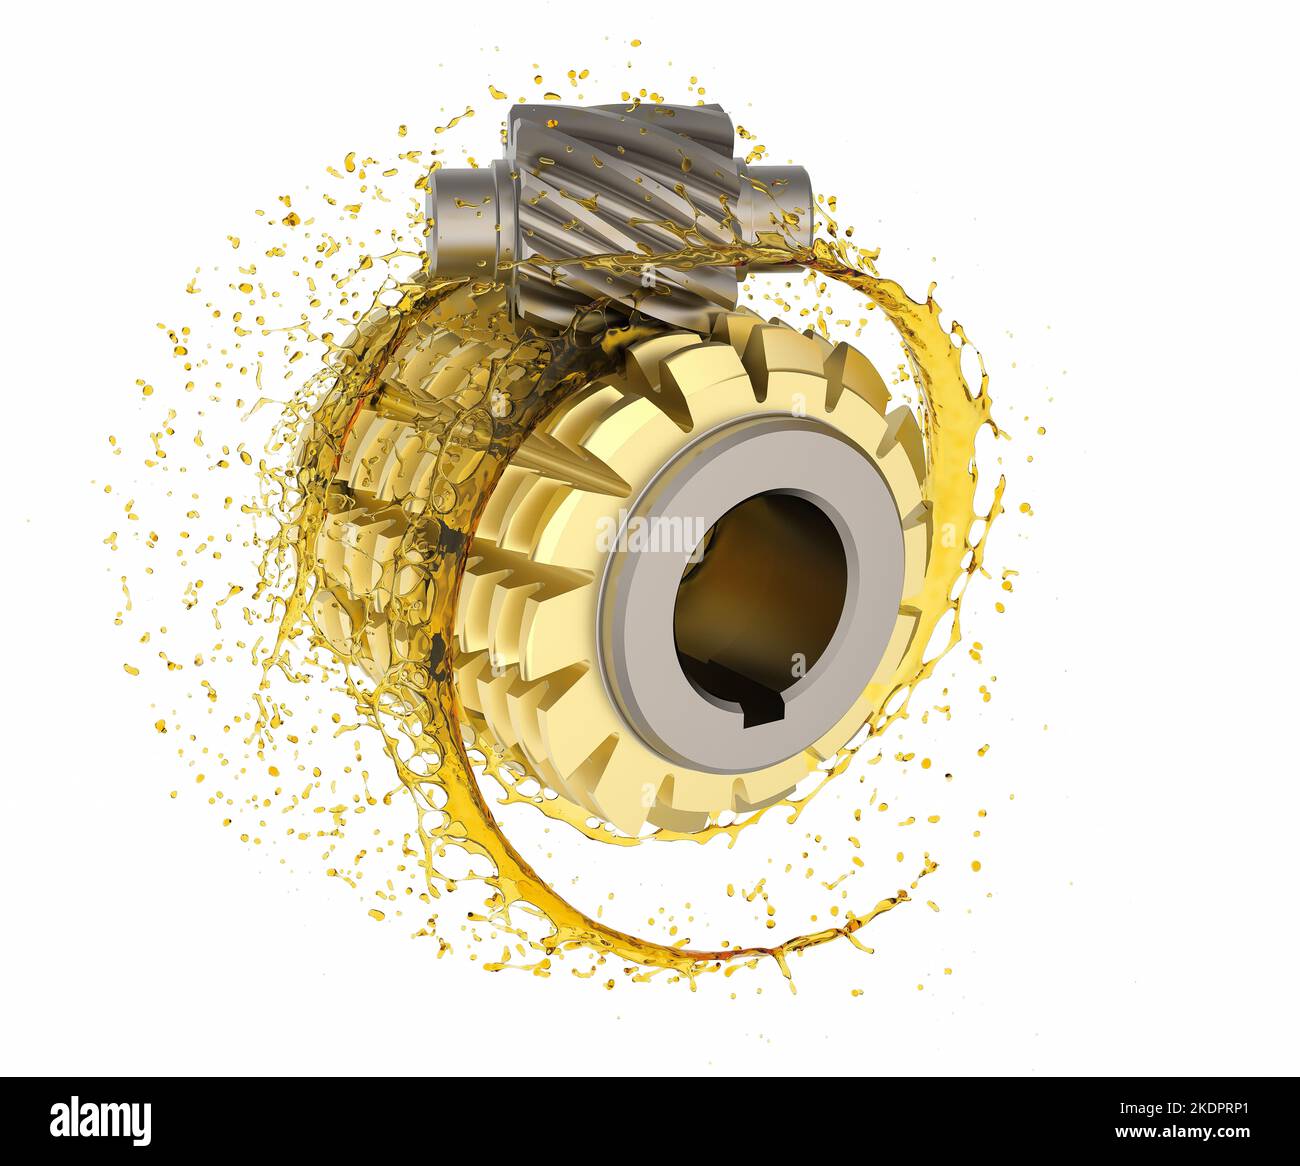 Gear hobbing of helical gear Hobbing process to cut a helical gear with lubricant oil. Stock Photo